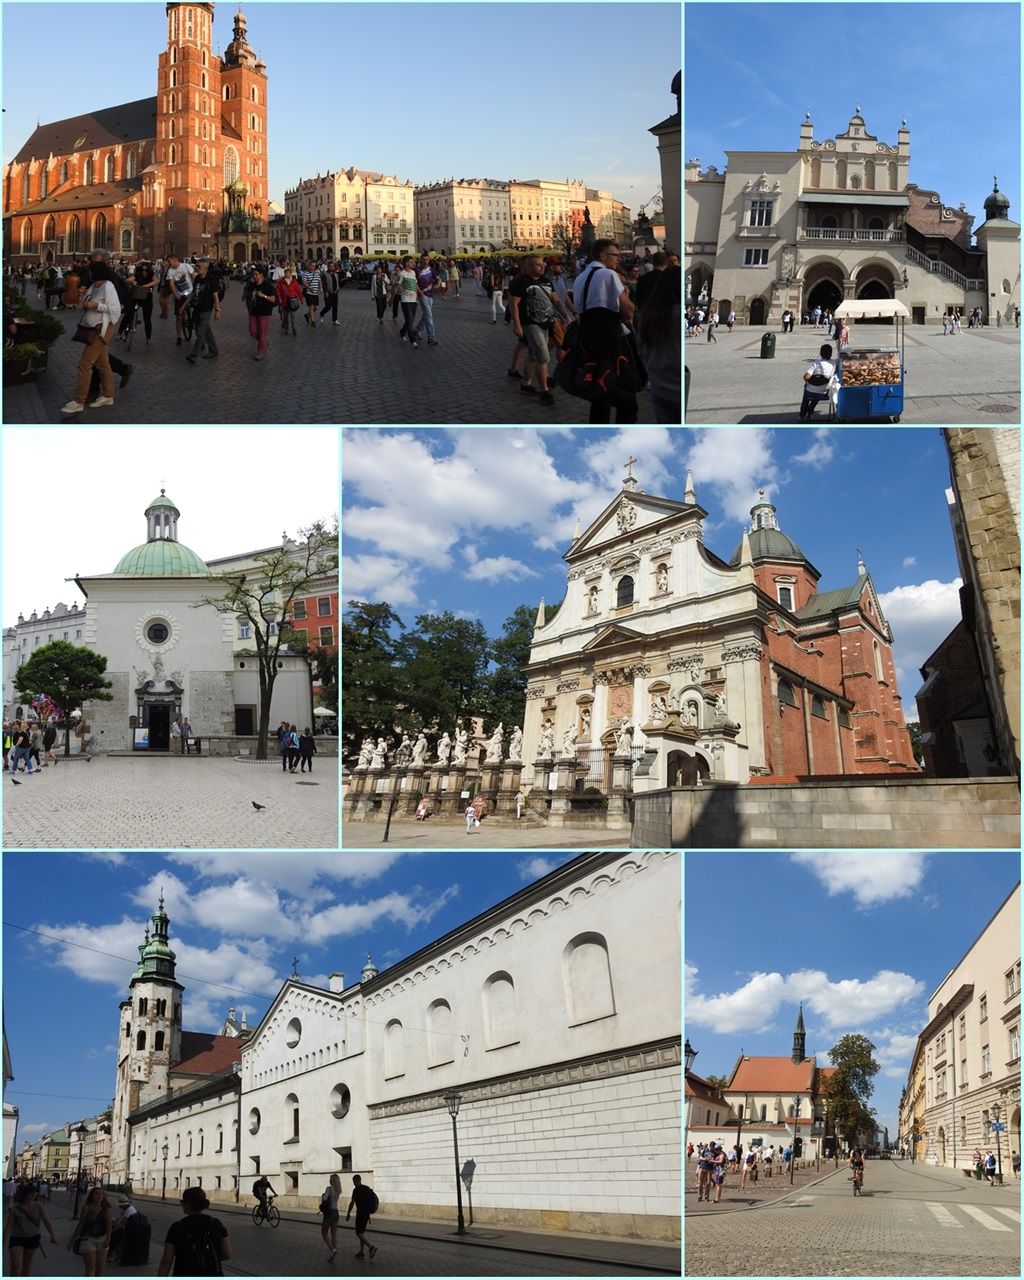 The Royal Road in pictures – Part 2.  From top to bottom and from left to right: St. Mary's Basilica, Sukiennice, the Church of St. Wojciech, the Church of Saints Peter and Paul, Grodzka street and the square at the foothills of Wawel Hill.